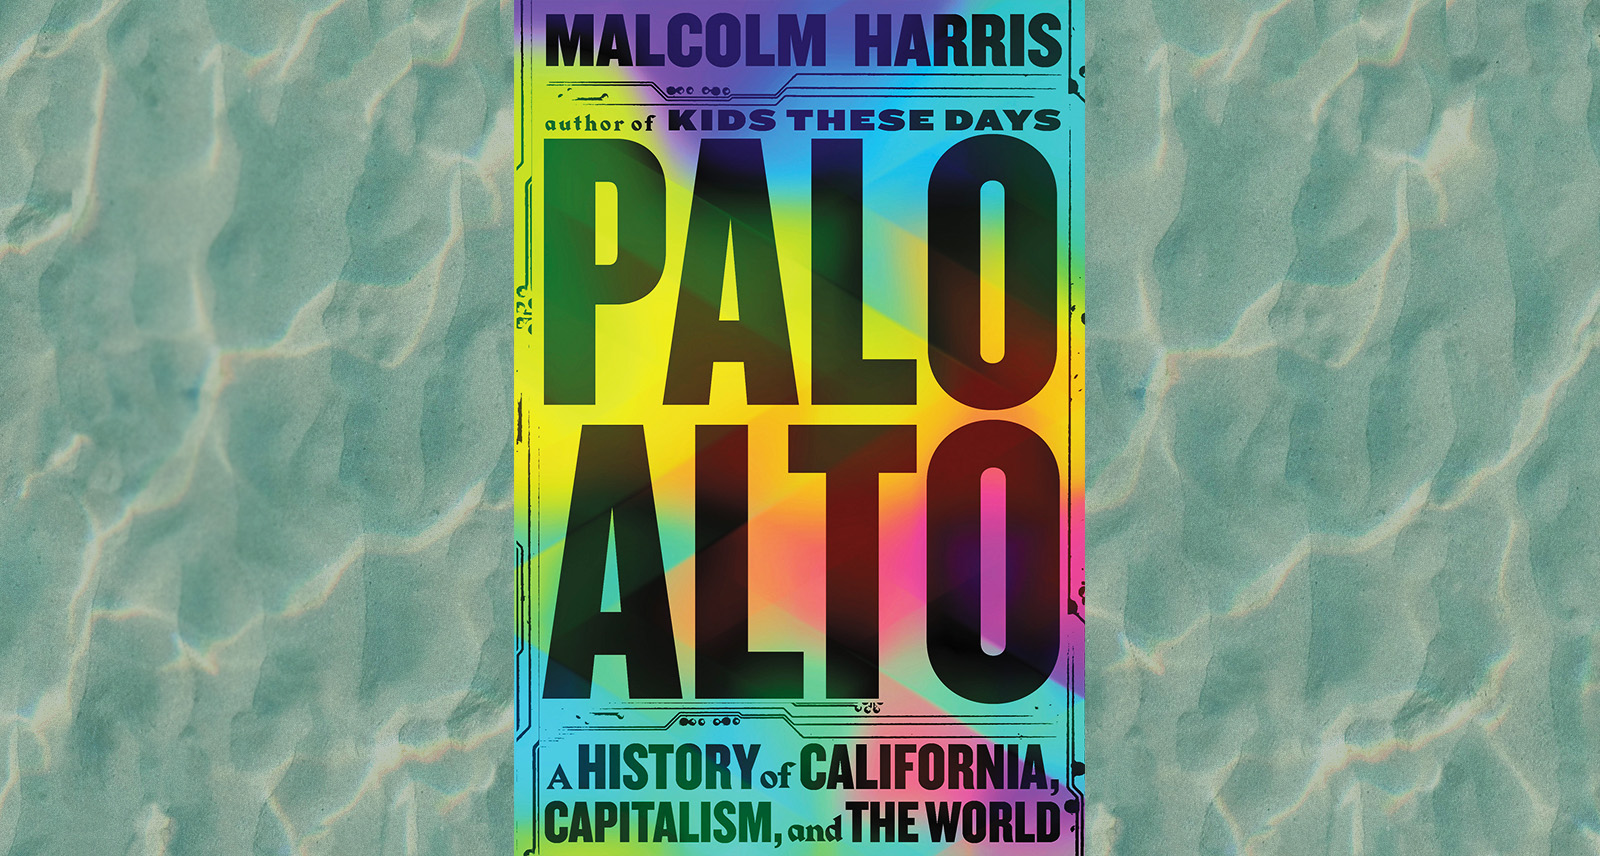 Palo Alto book cover with pool background